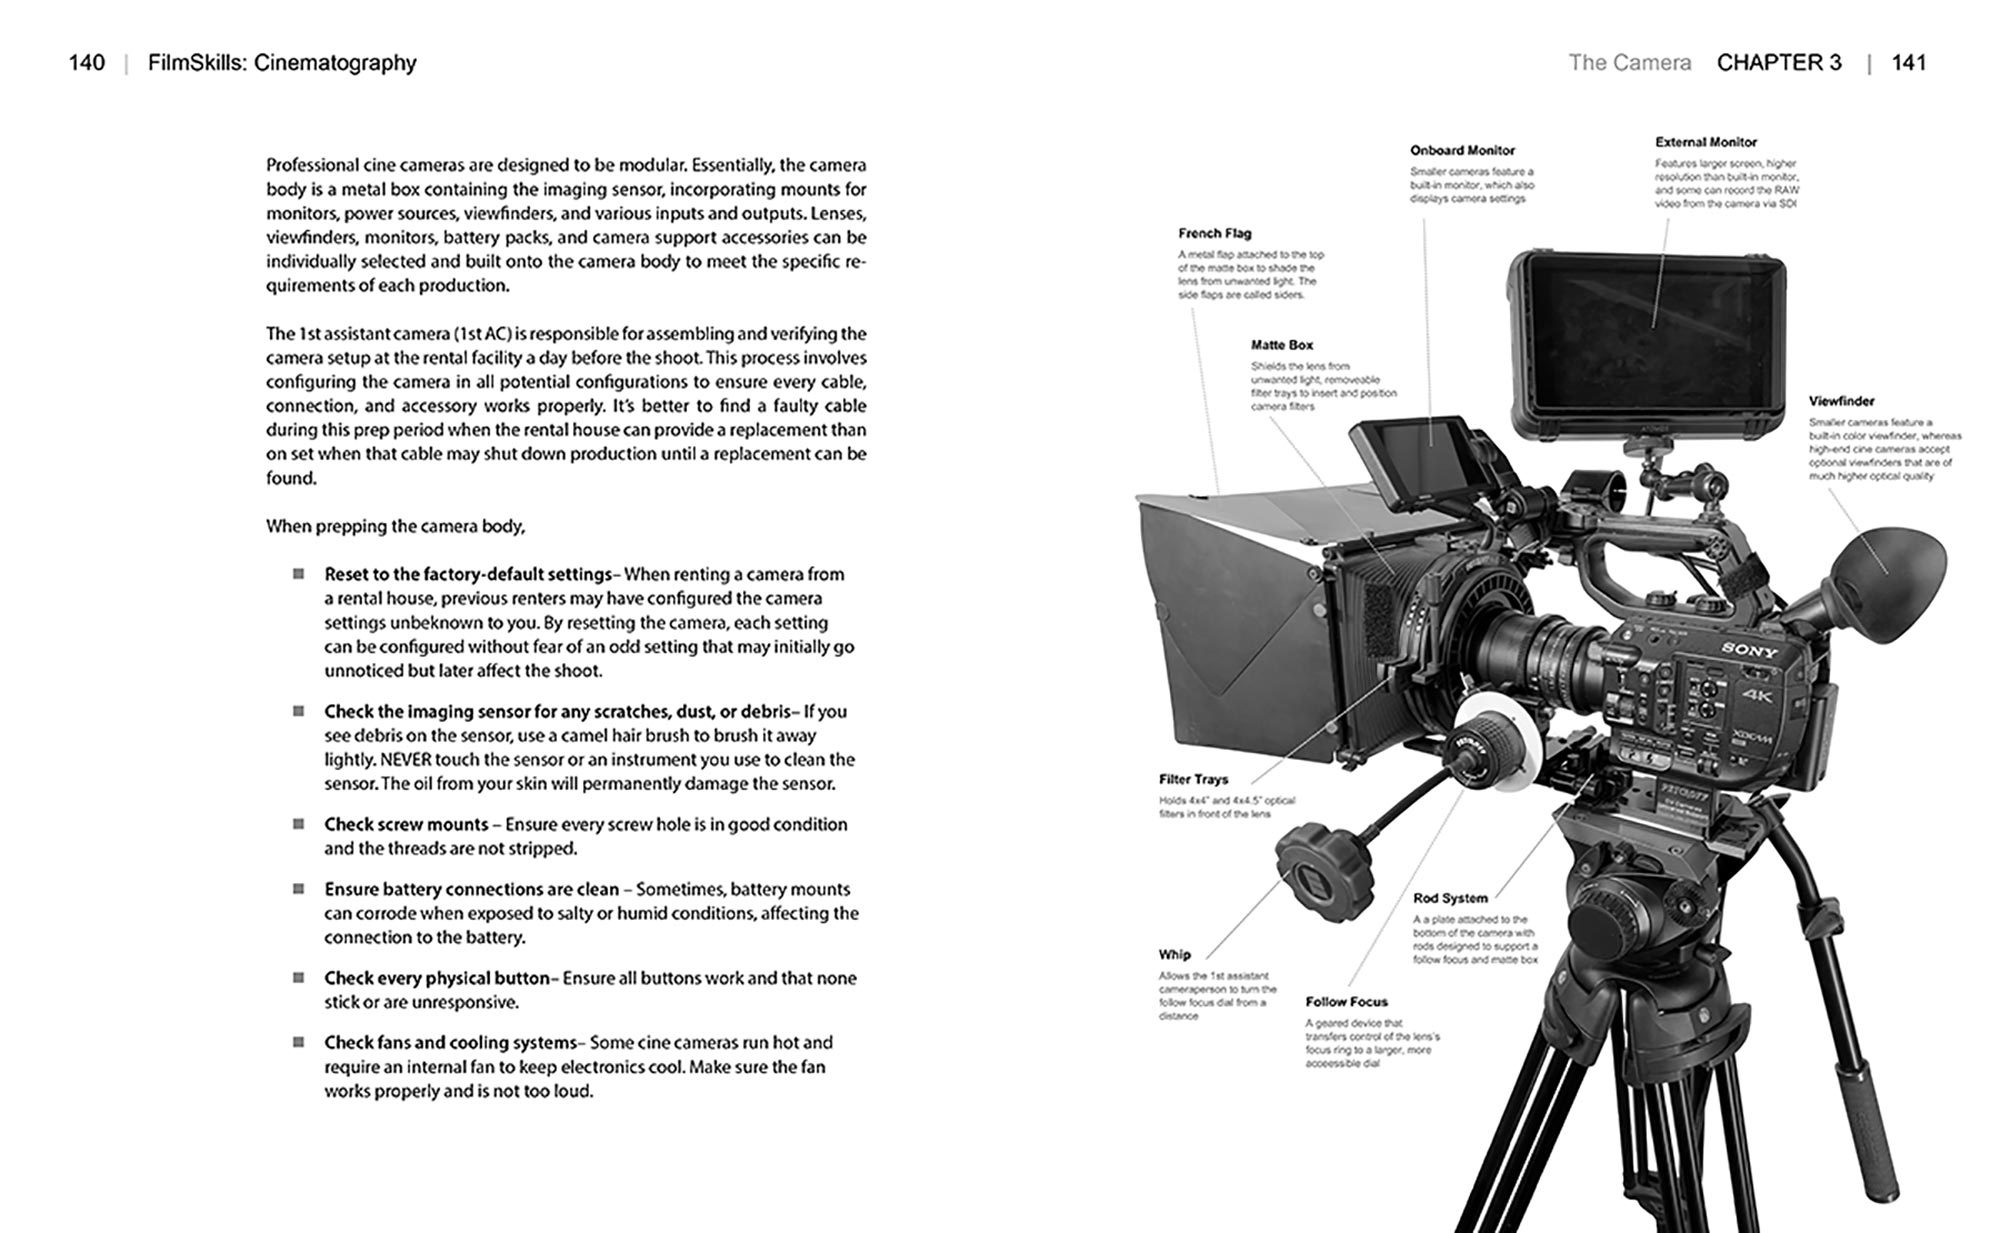 FilmSkills-Cinematography-2nd-Edition---Export-9---no-bleed-71